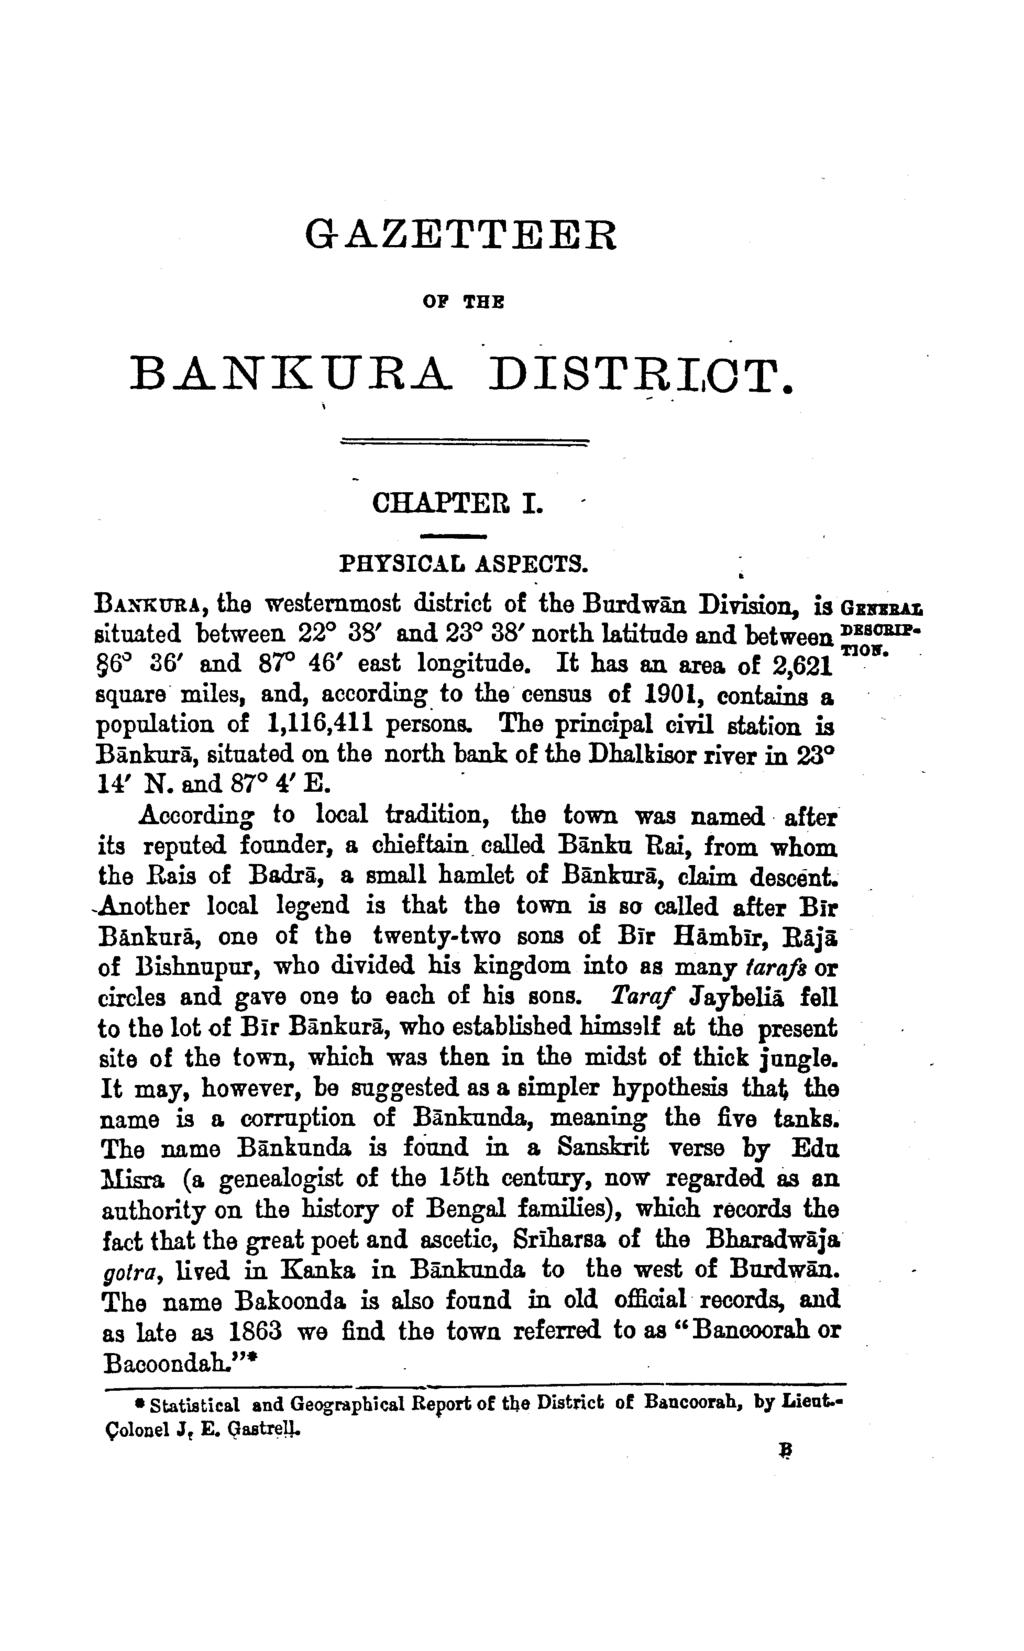 GAZETTEER OP THE BANKUR.A DISTRI.CT. -. CHAPTER I. PHYSICAL ASPECTS. DA!o."'KURA, the westernmost district of the Bur